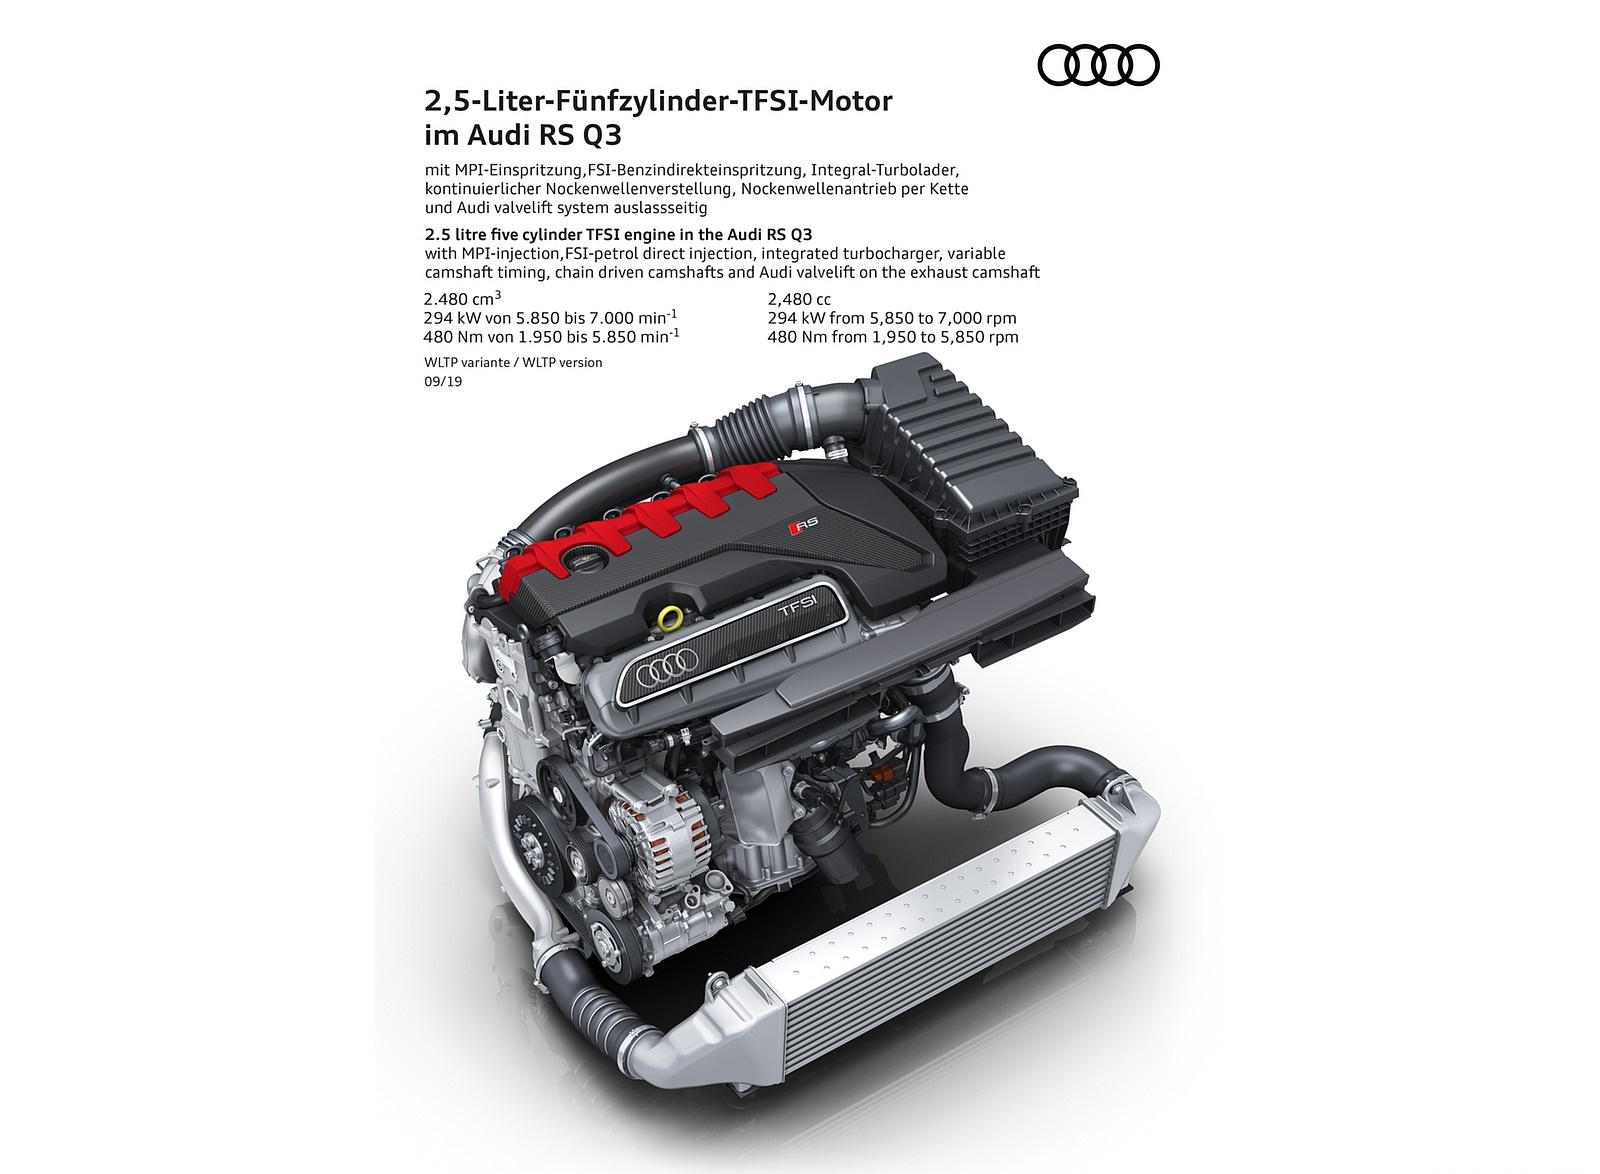 2020 Audi RS Q3 2.5 litre five cylinder TFSI engine in the Audi RS Q3 Wallpapers #115 of 116